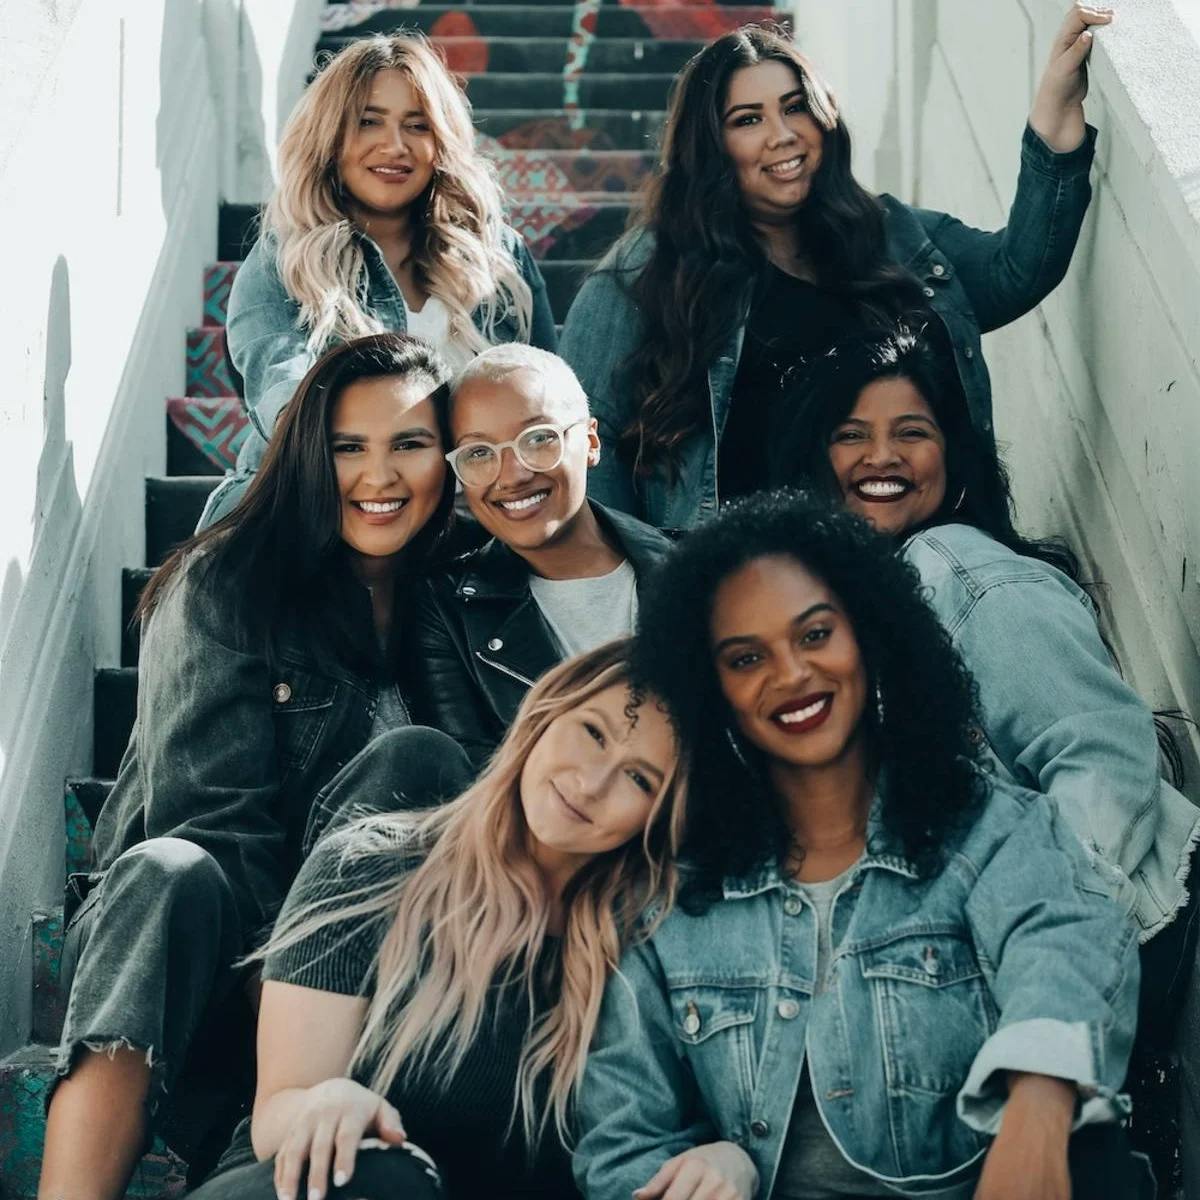 A group of seven diverse women wearing denim-focused outfits sit together in rows on an outdoor staircase, smiling at the camera and embracing each other.